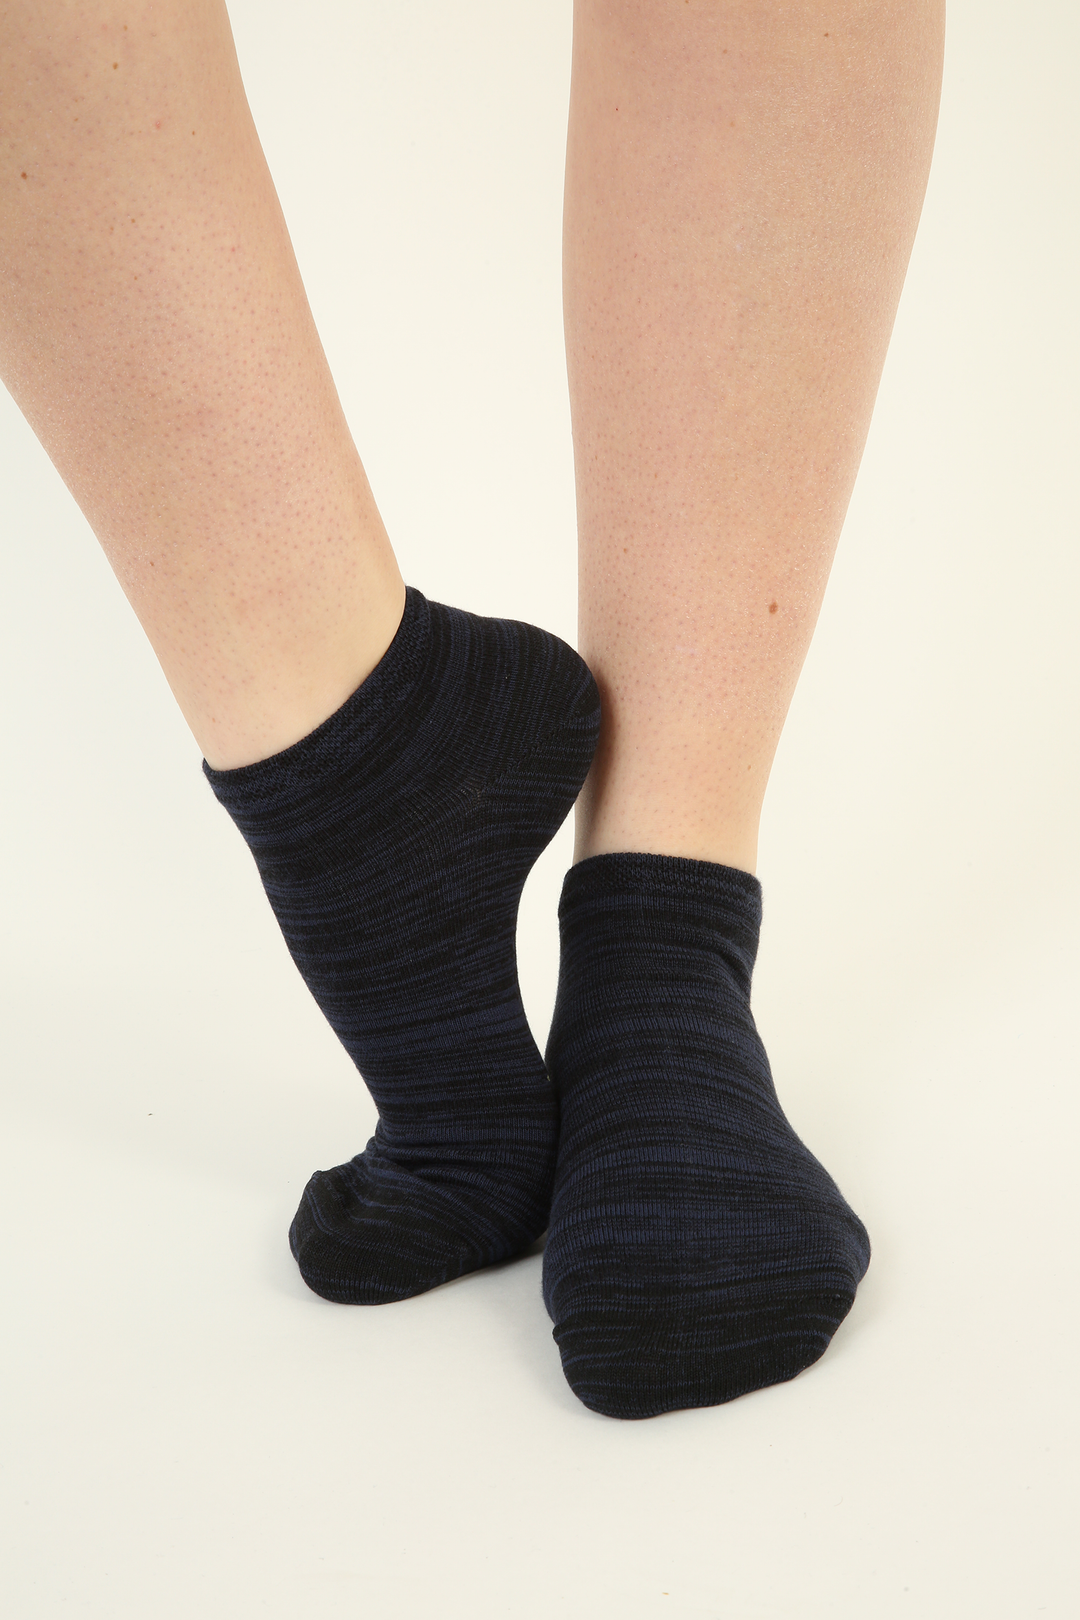 Low Bamboo and cotton socks without elastic and seams - 3 pairs